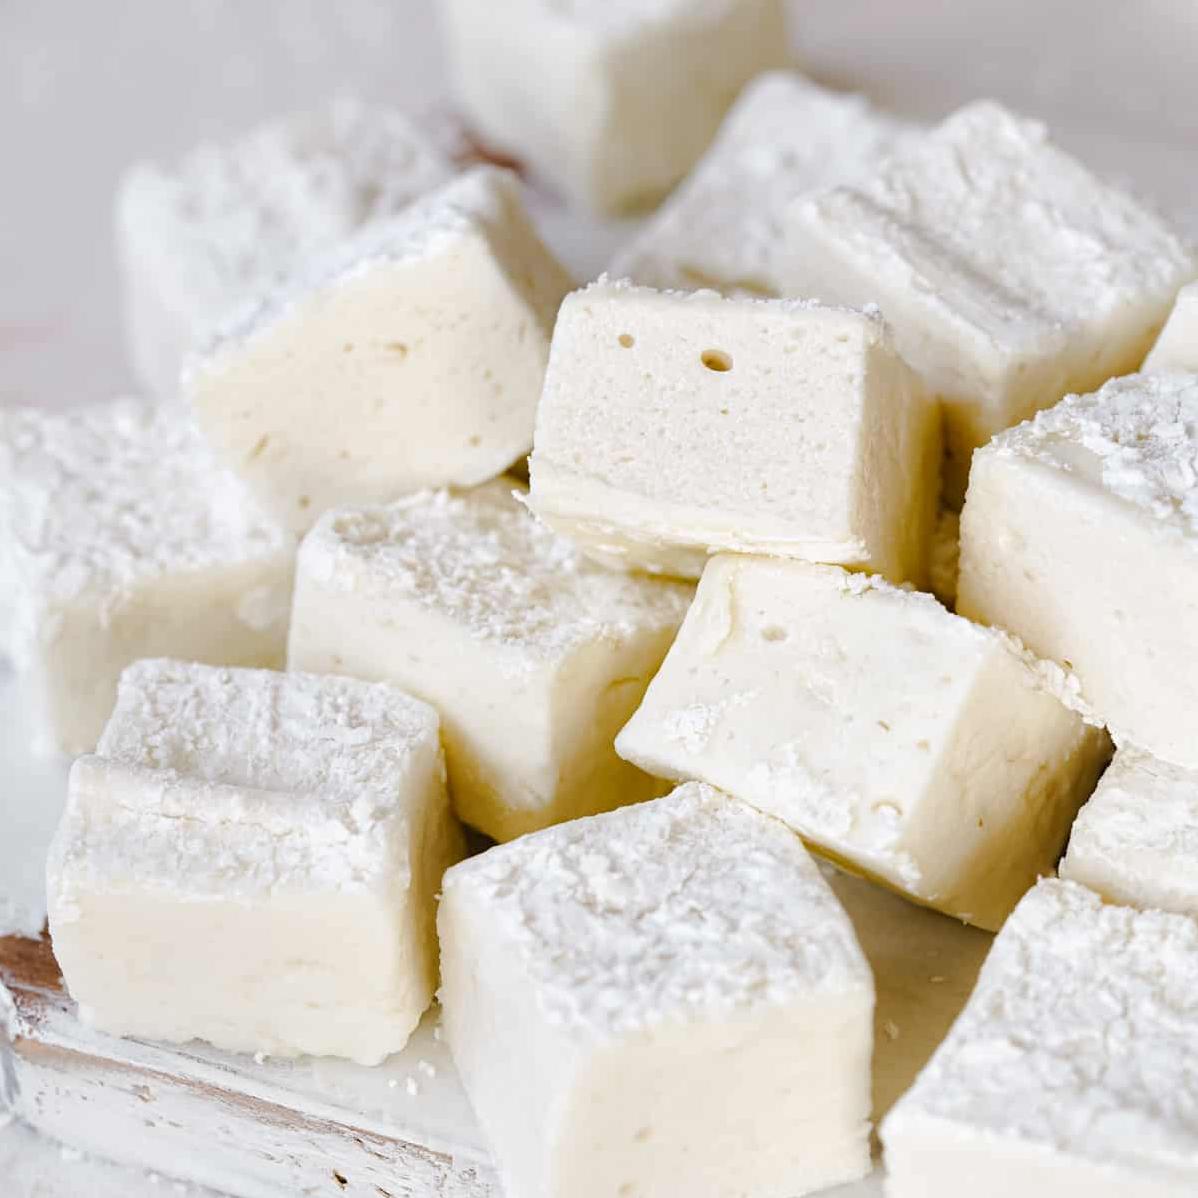  Homemade marshmallows that are cruelty-free and delicious!